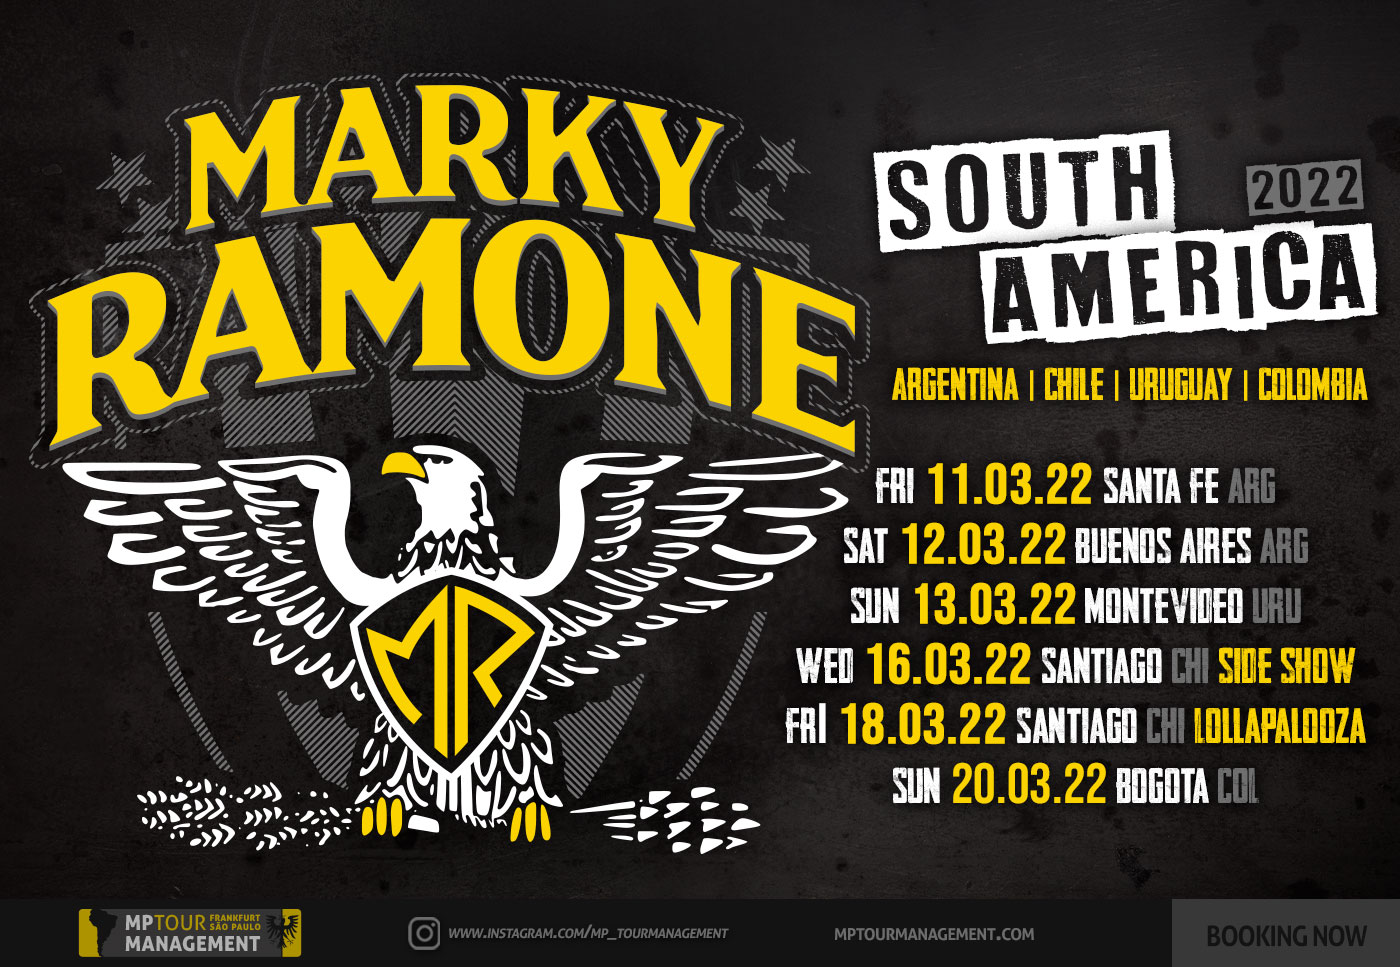 Marky Ramone in South America 2022